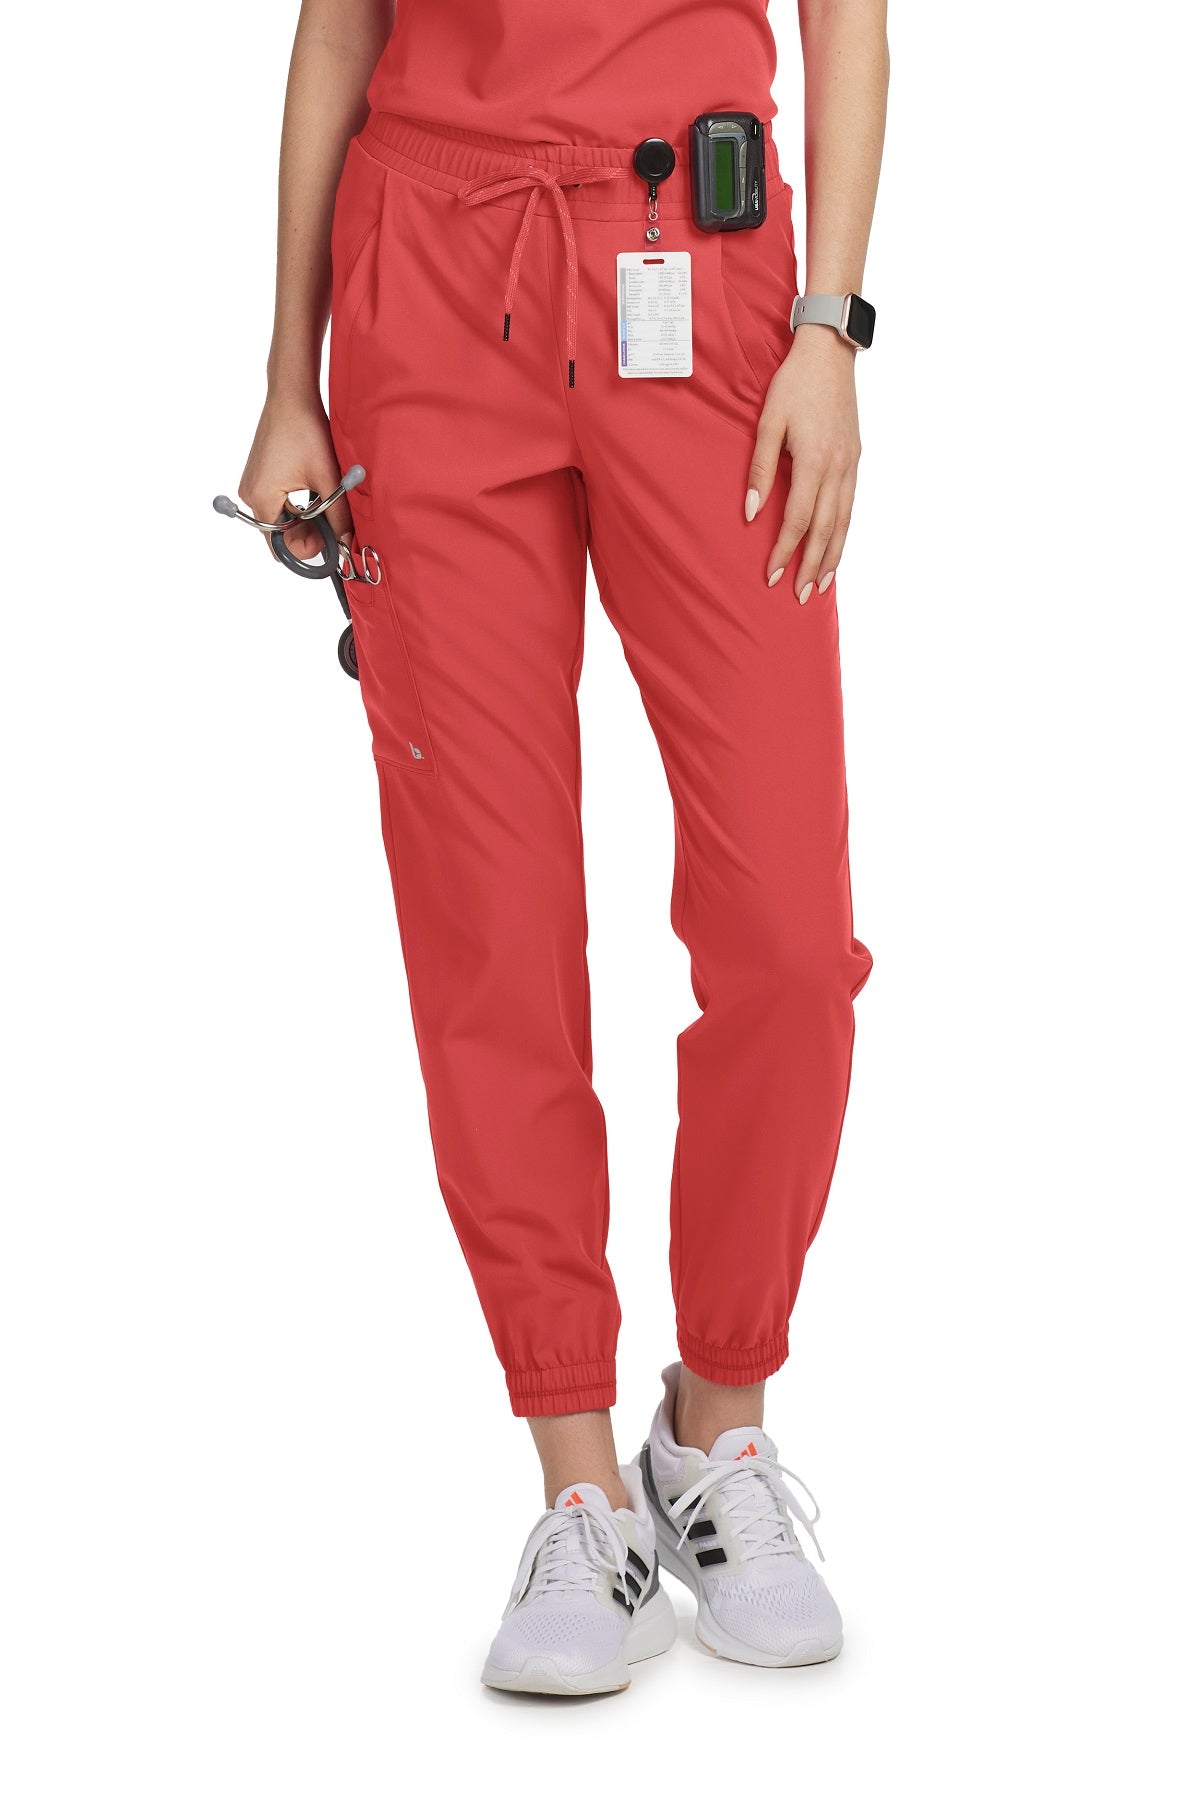 Barco Unify Scrub Pants Mission Jogger Petite Length in Dusty Red at Parker's Clothing and Shoes.